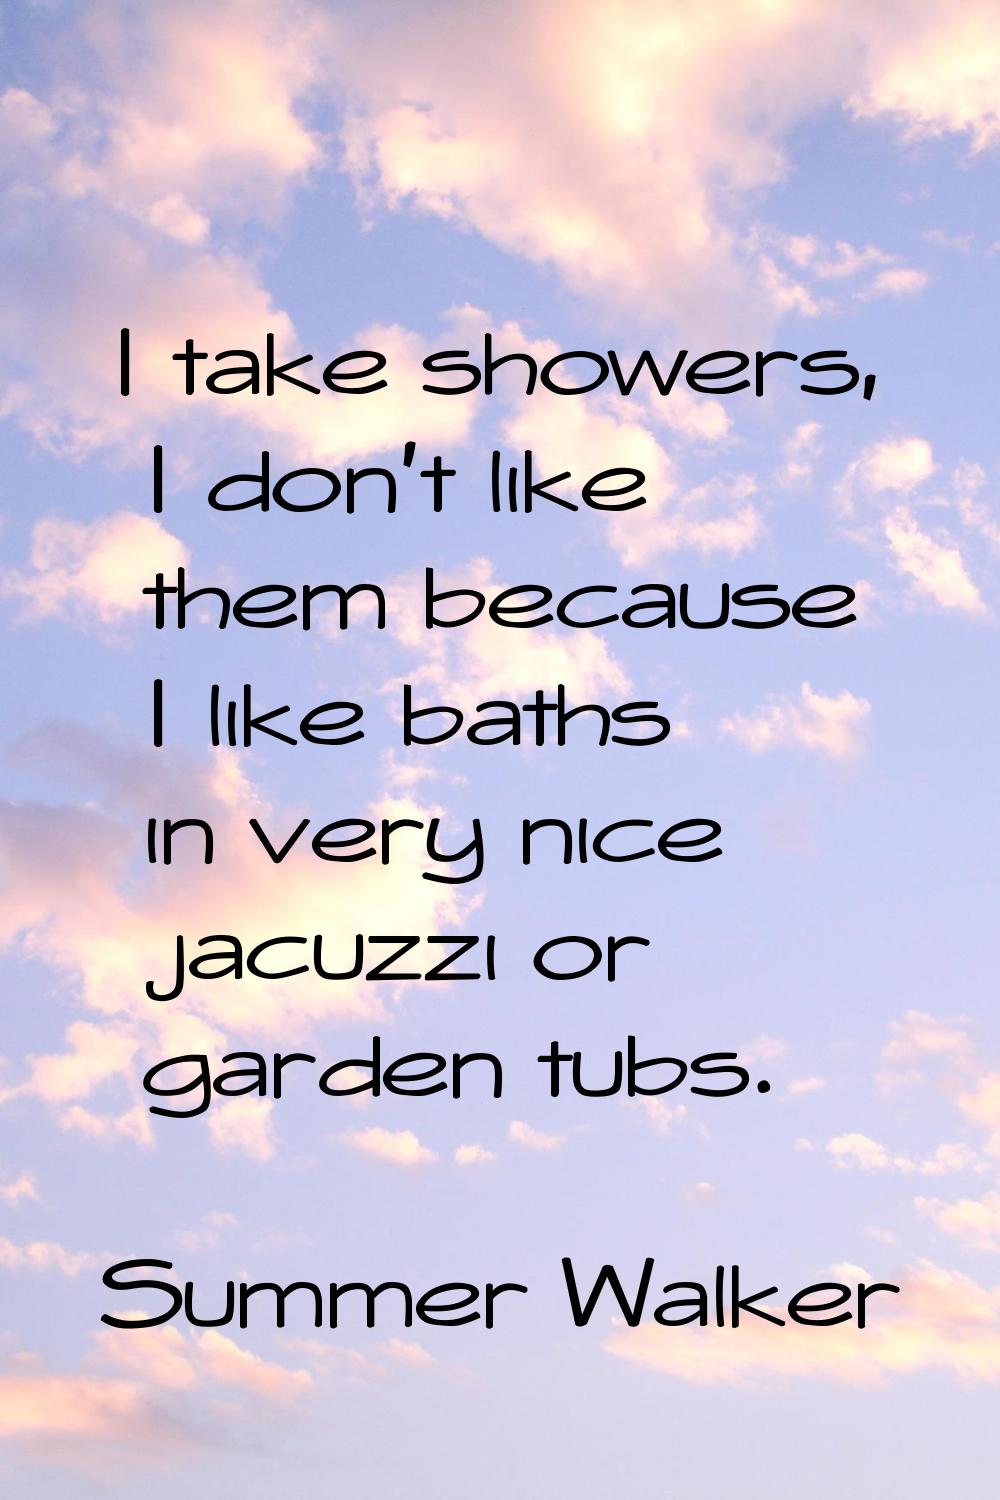 I take showers, I don't like them because I like baths in very nice jacuzzi or garden tubs.